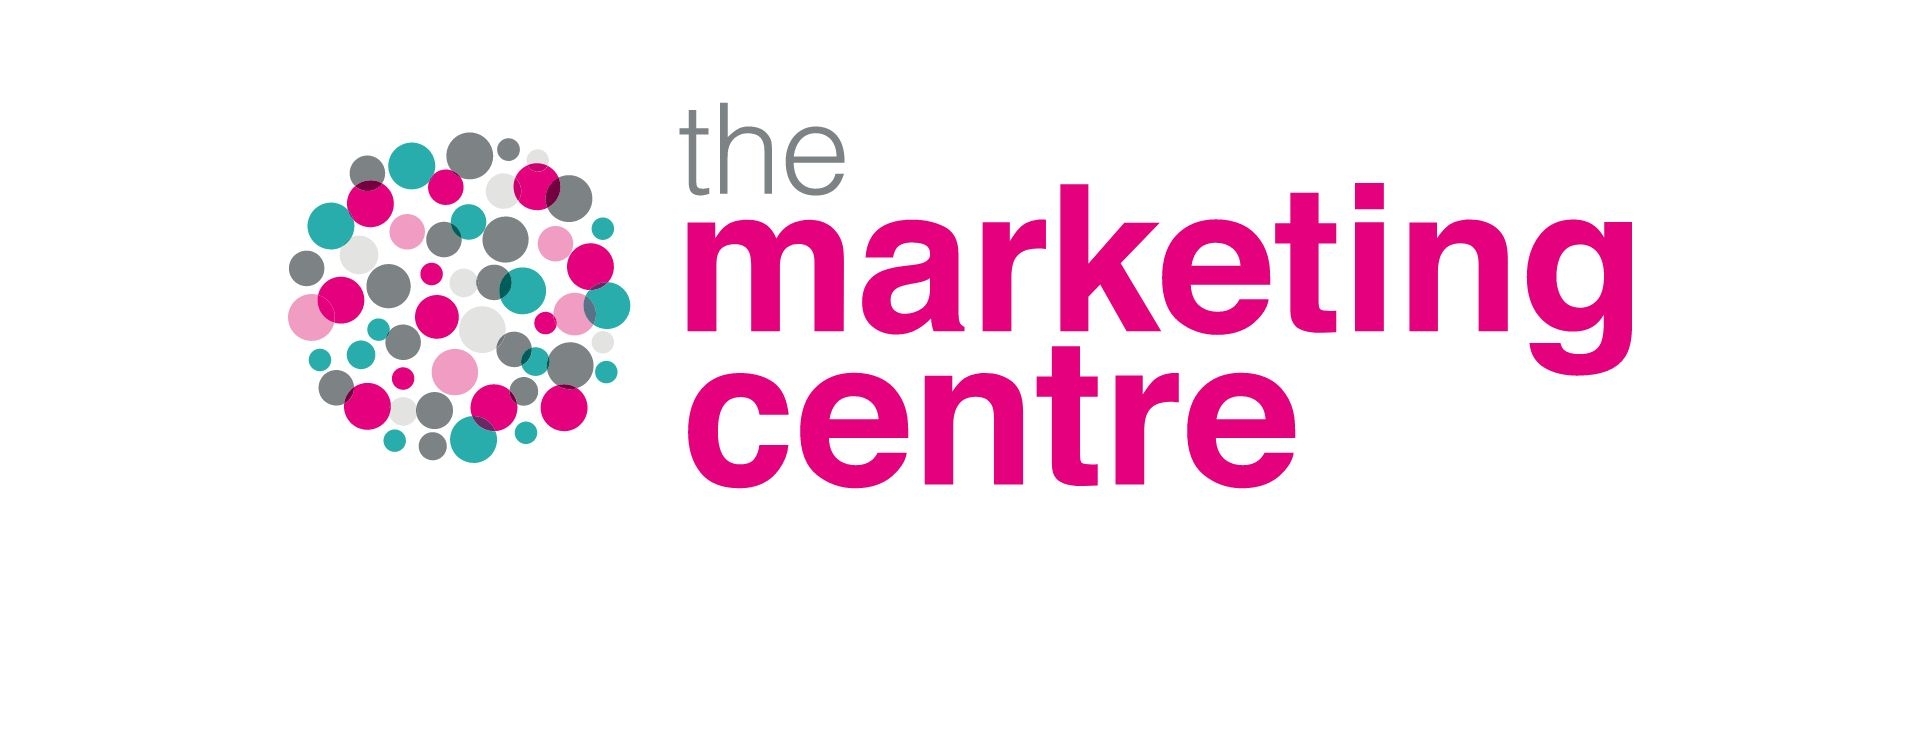 New report finds two-thirds of SMES have no marketing plan and are marketing in the dark